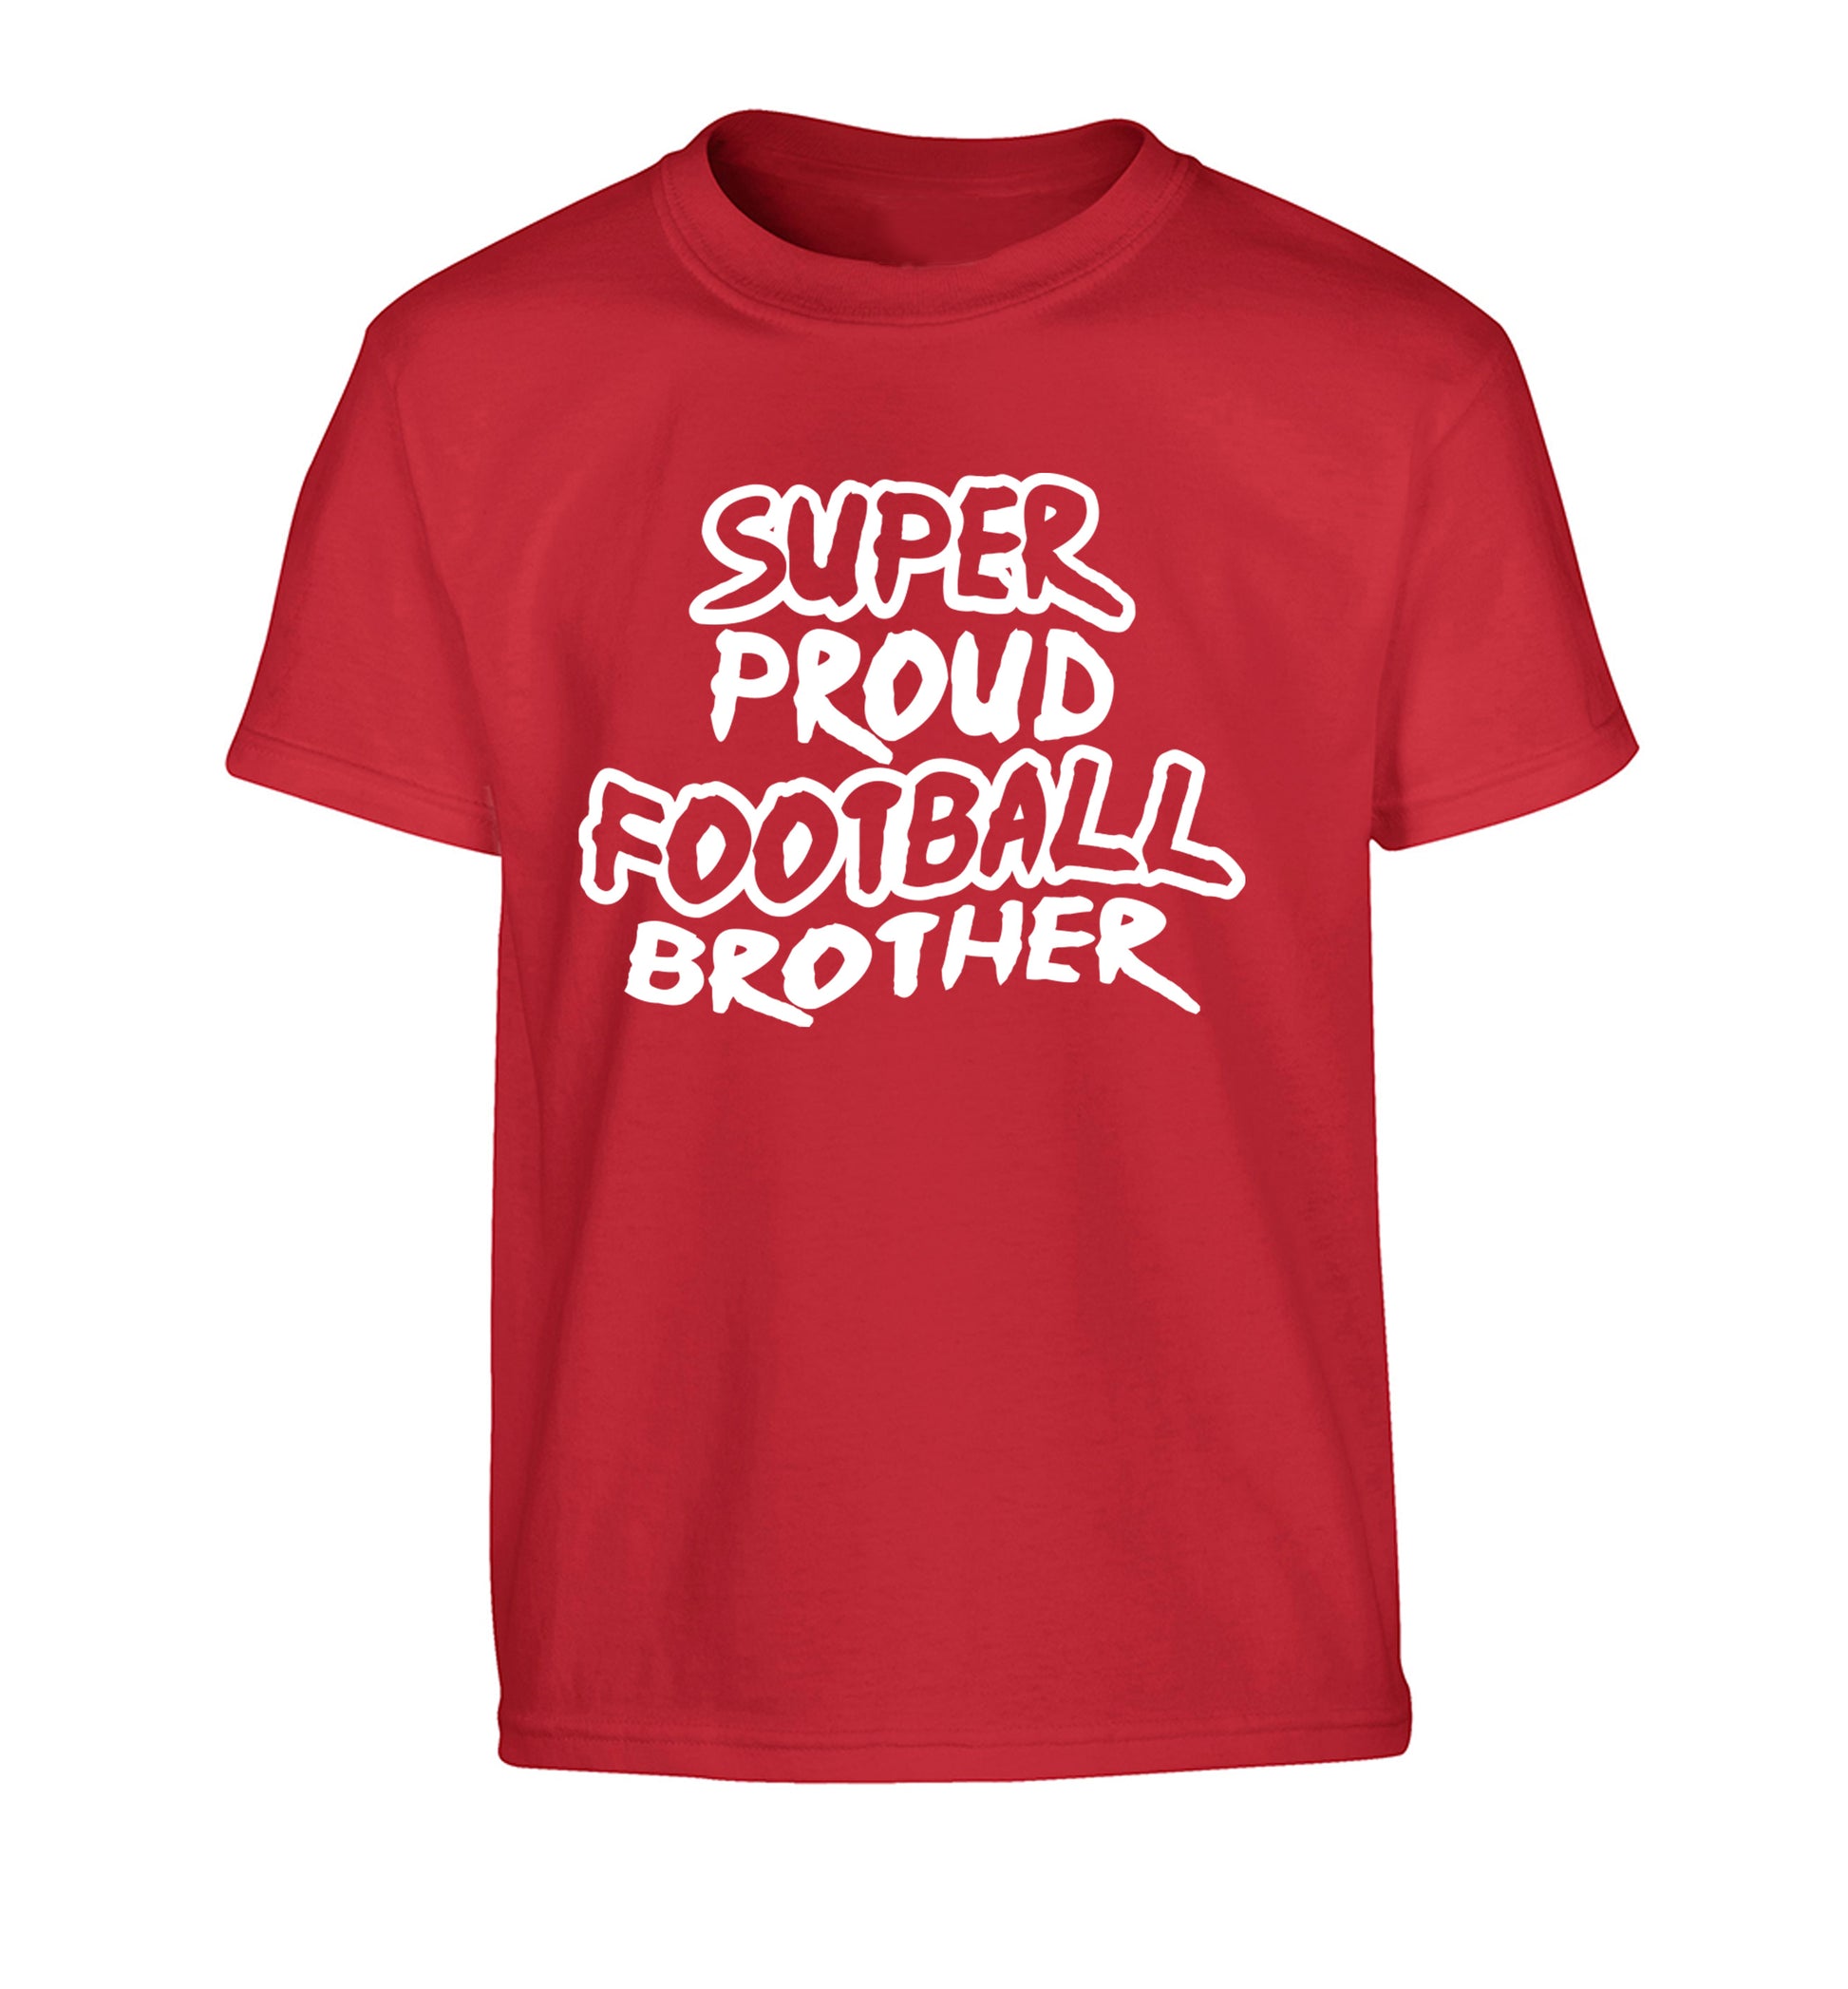 Super proud football brother Children's red Tshirt 12-14 Years